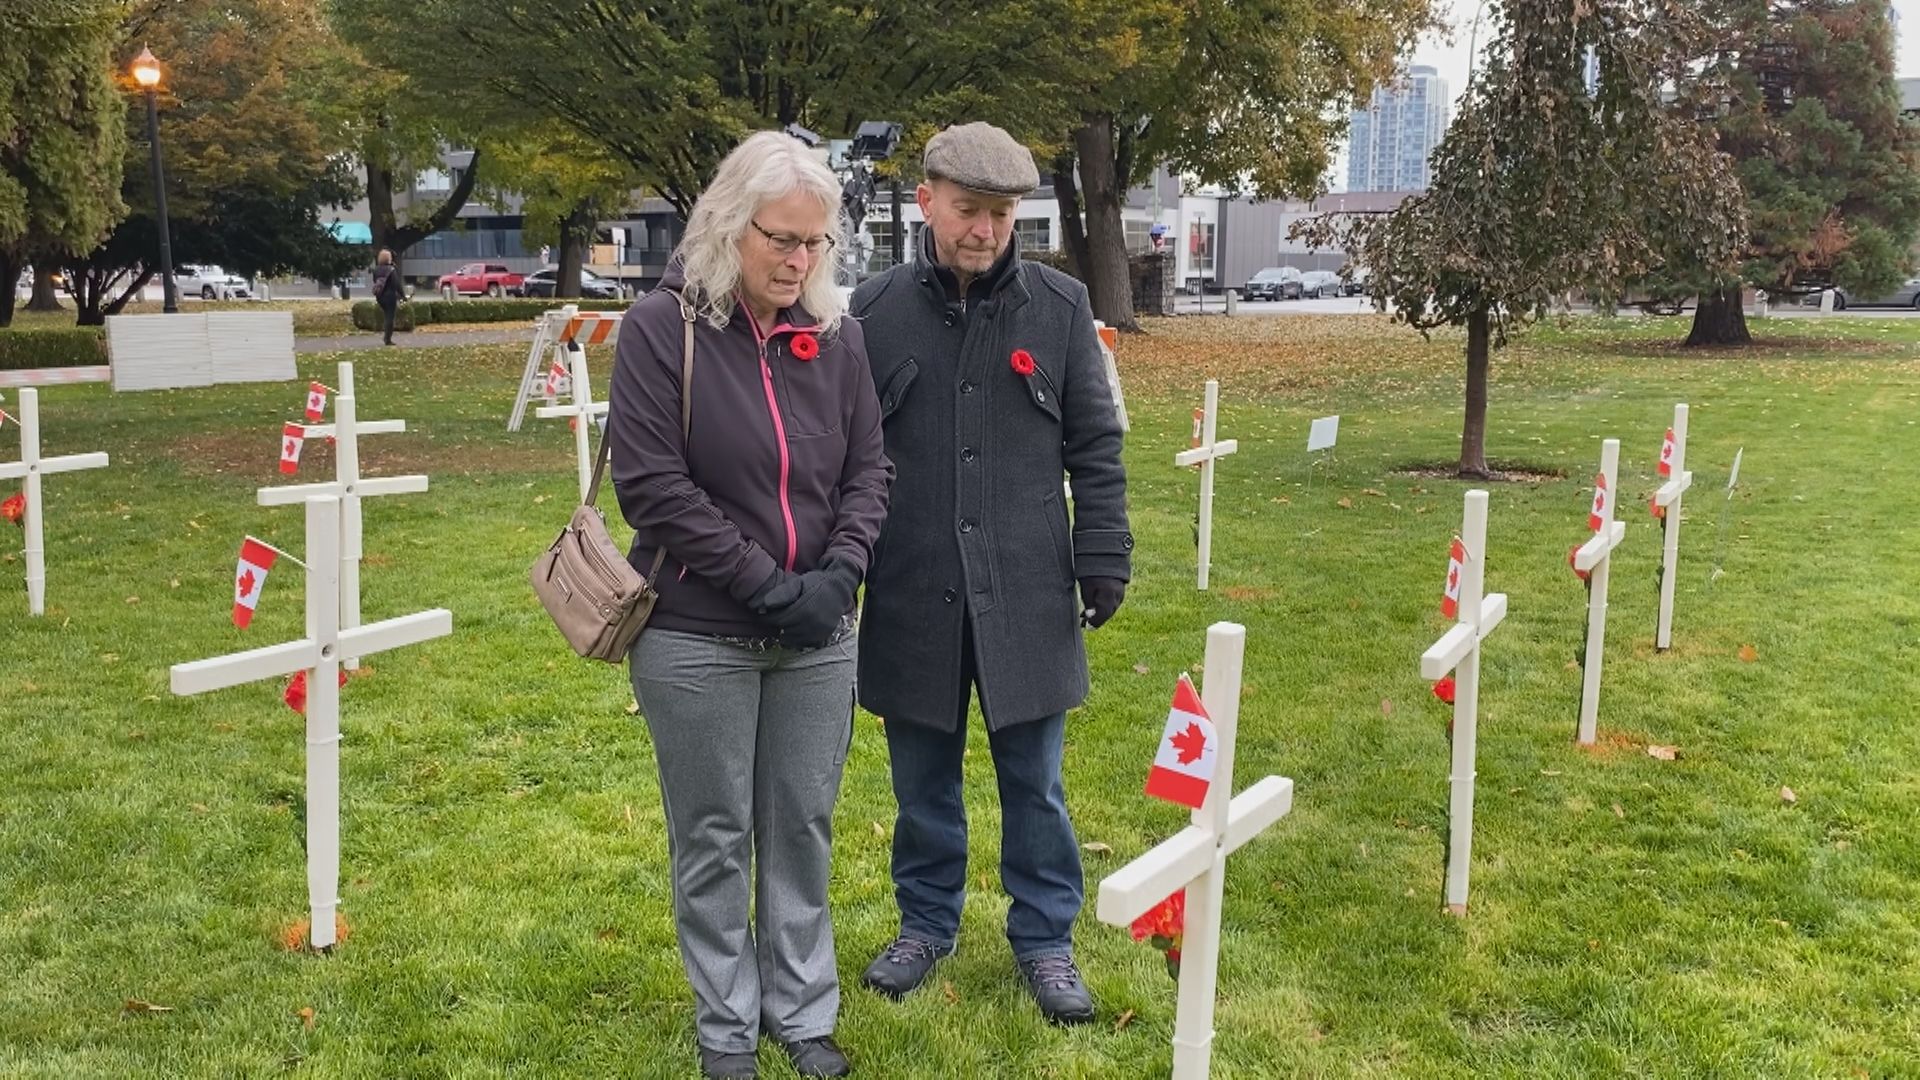 Family of WWII veteran killed in action touched by Field of Crosses memorial in Kelowna